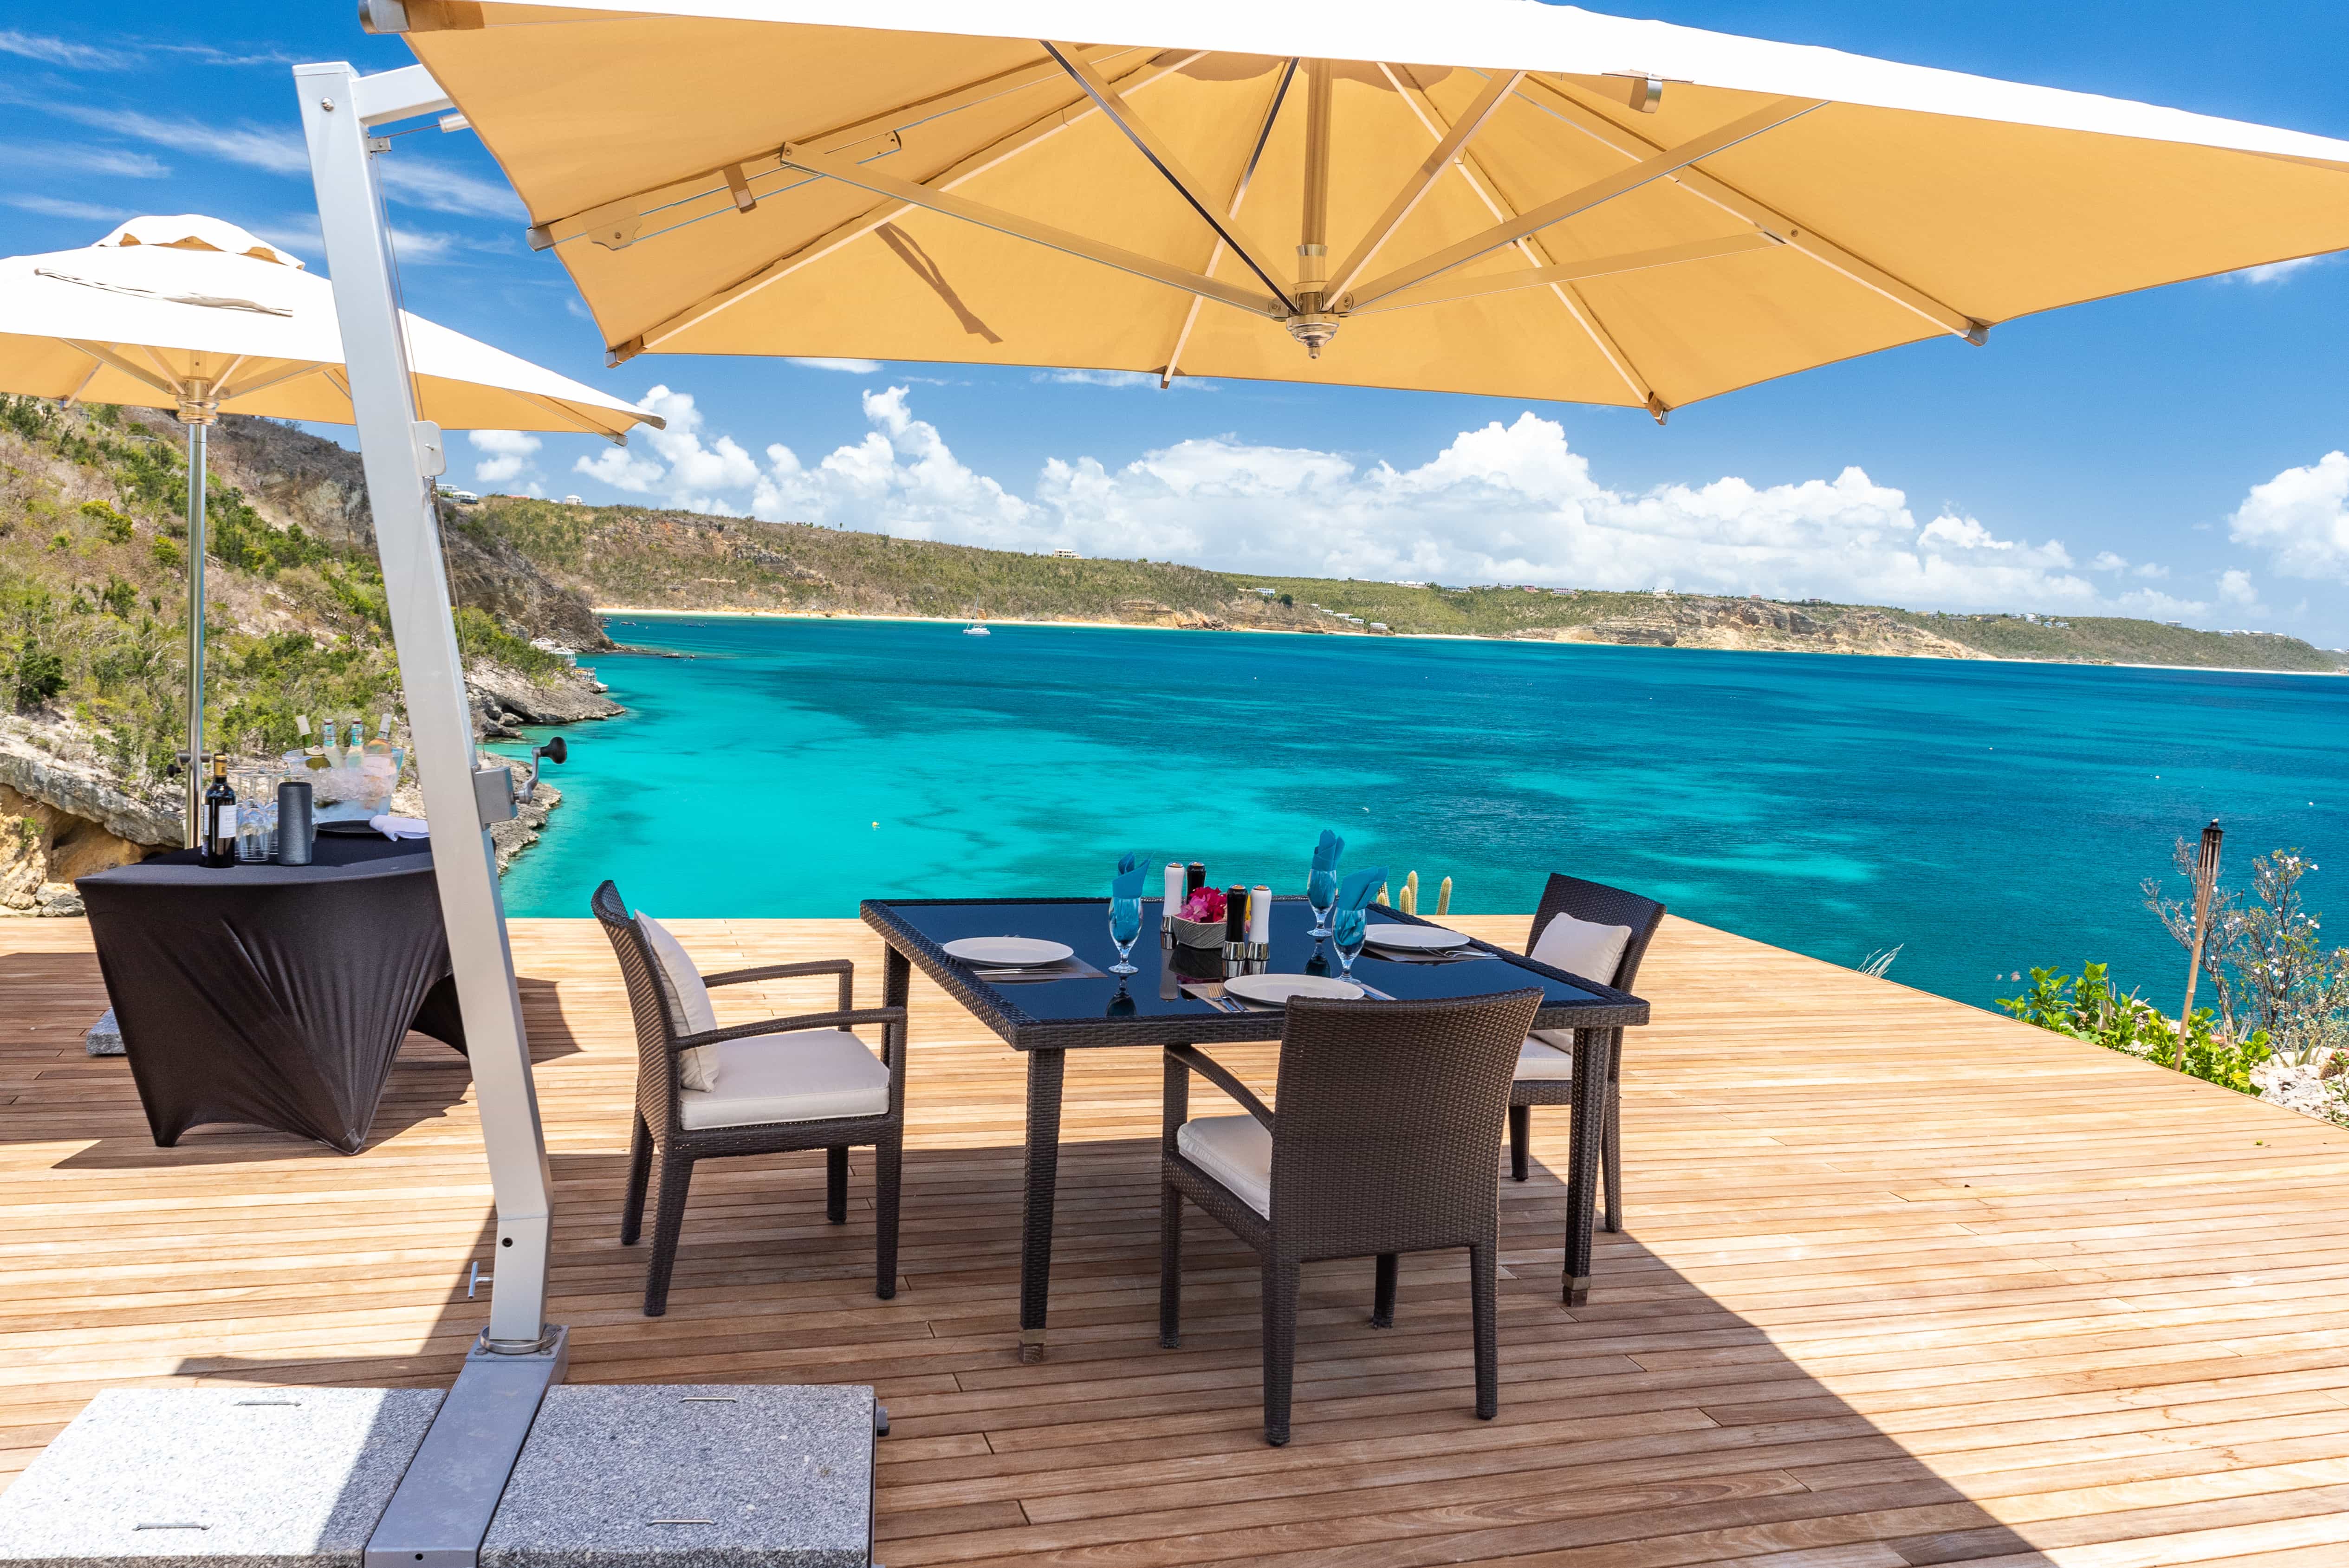 Dine at your leisure and at the location of your choice — anywhere on island or even neighboring islands.